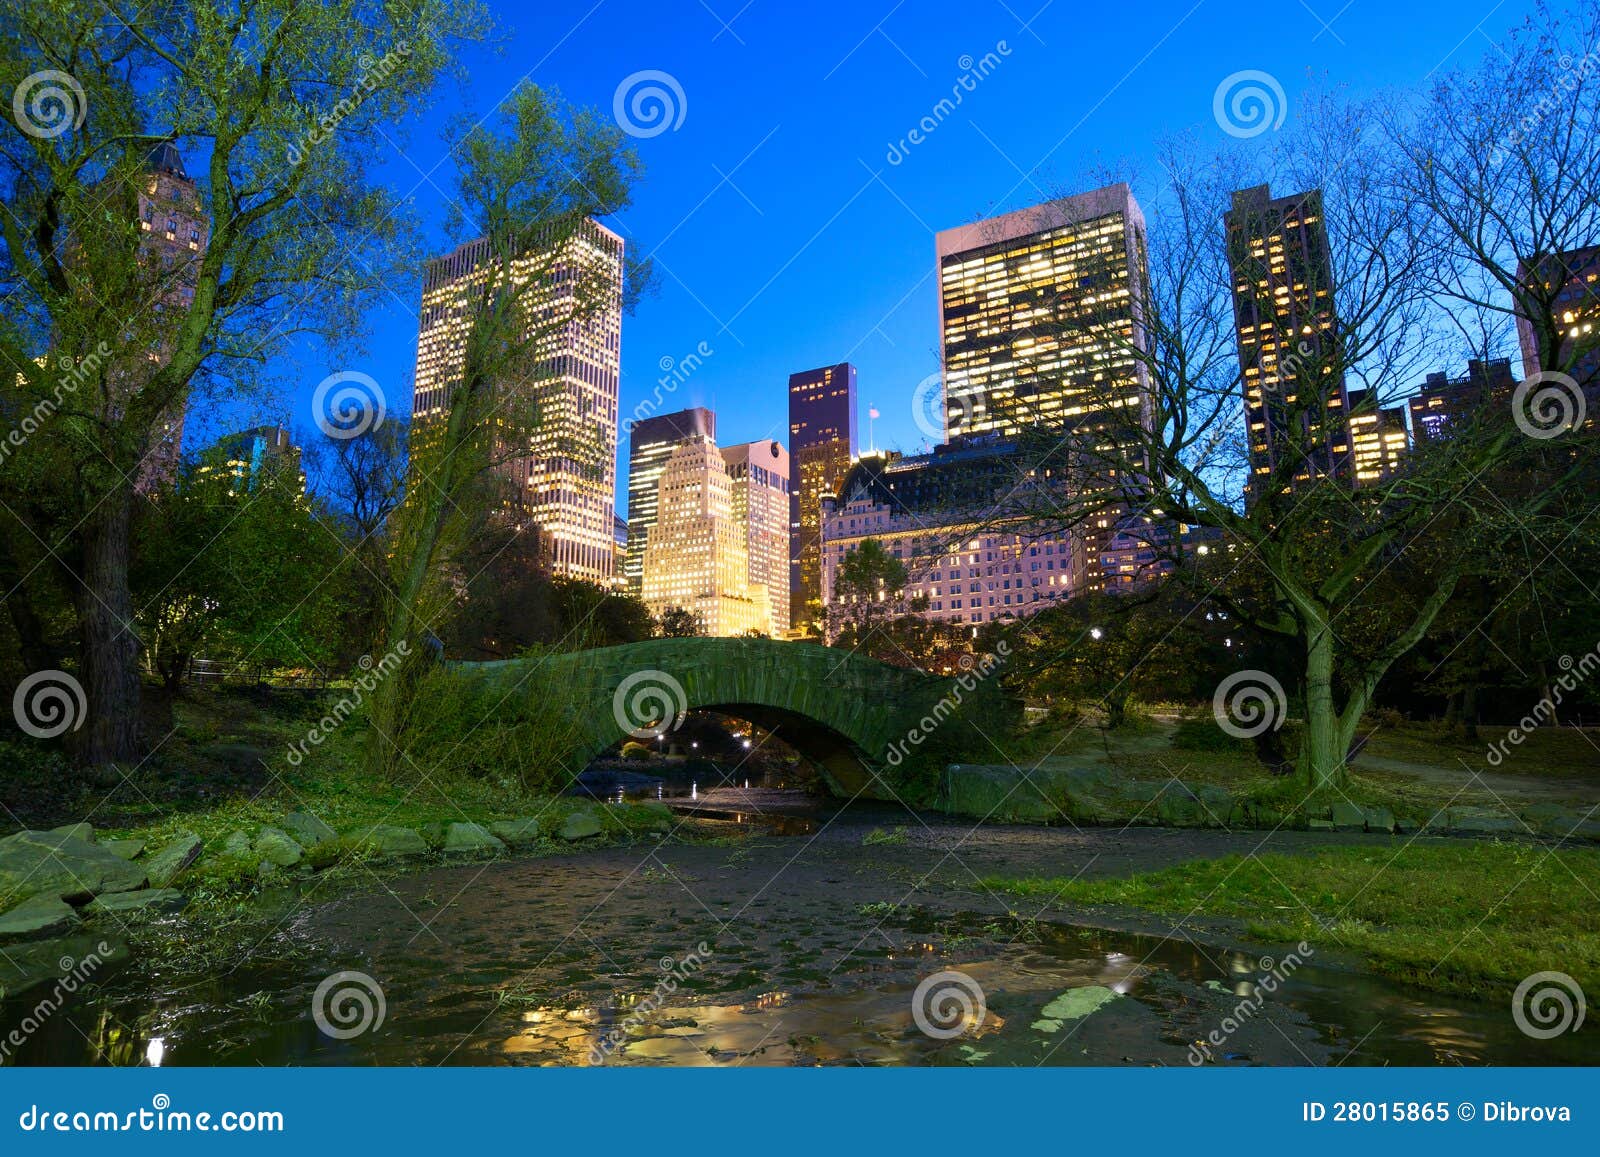 NYC Central Park at night stock image. Image of central - 28015865